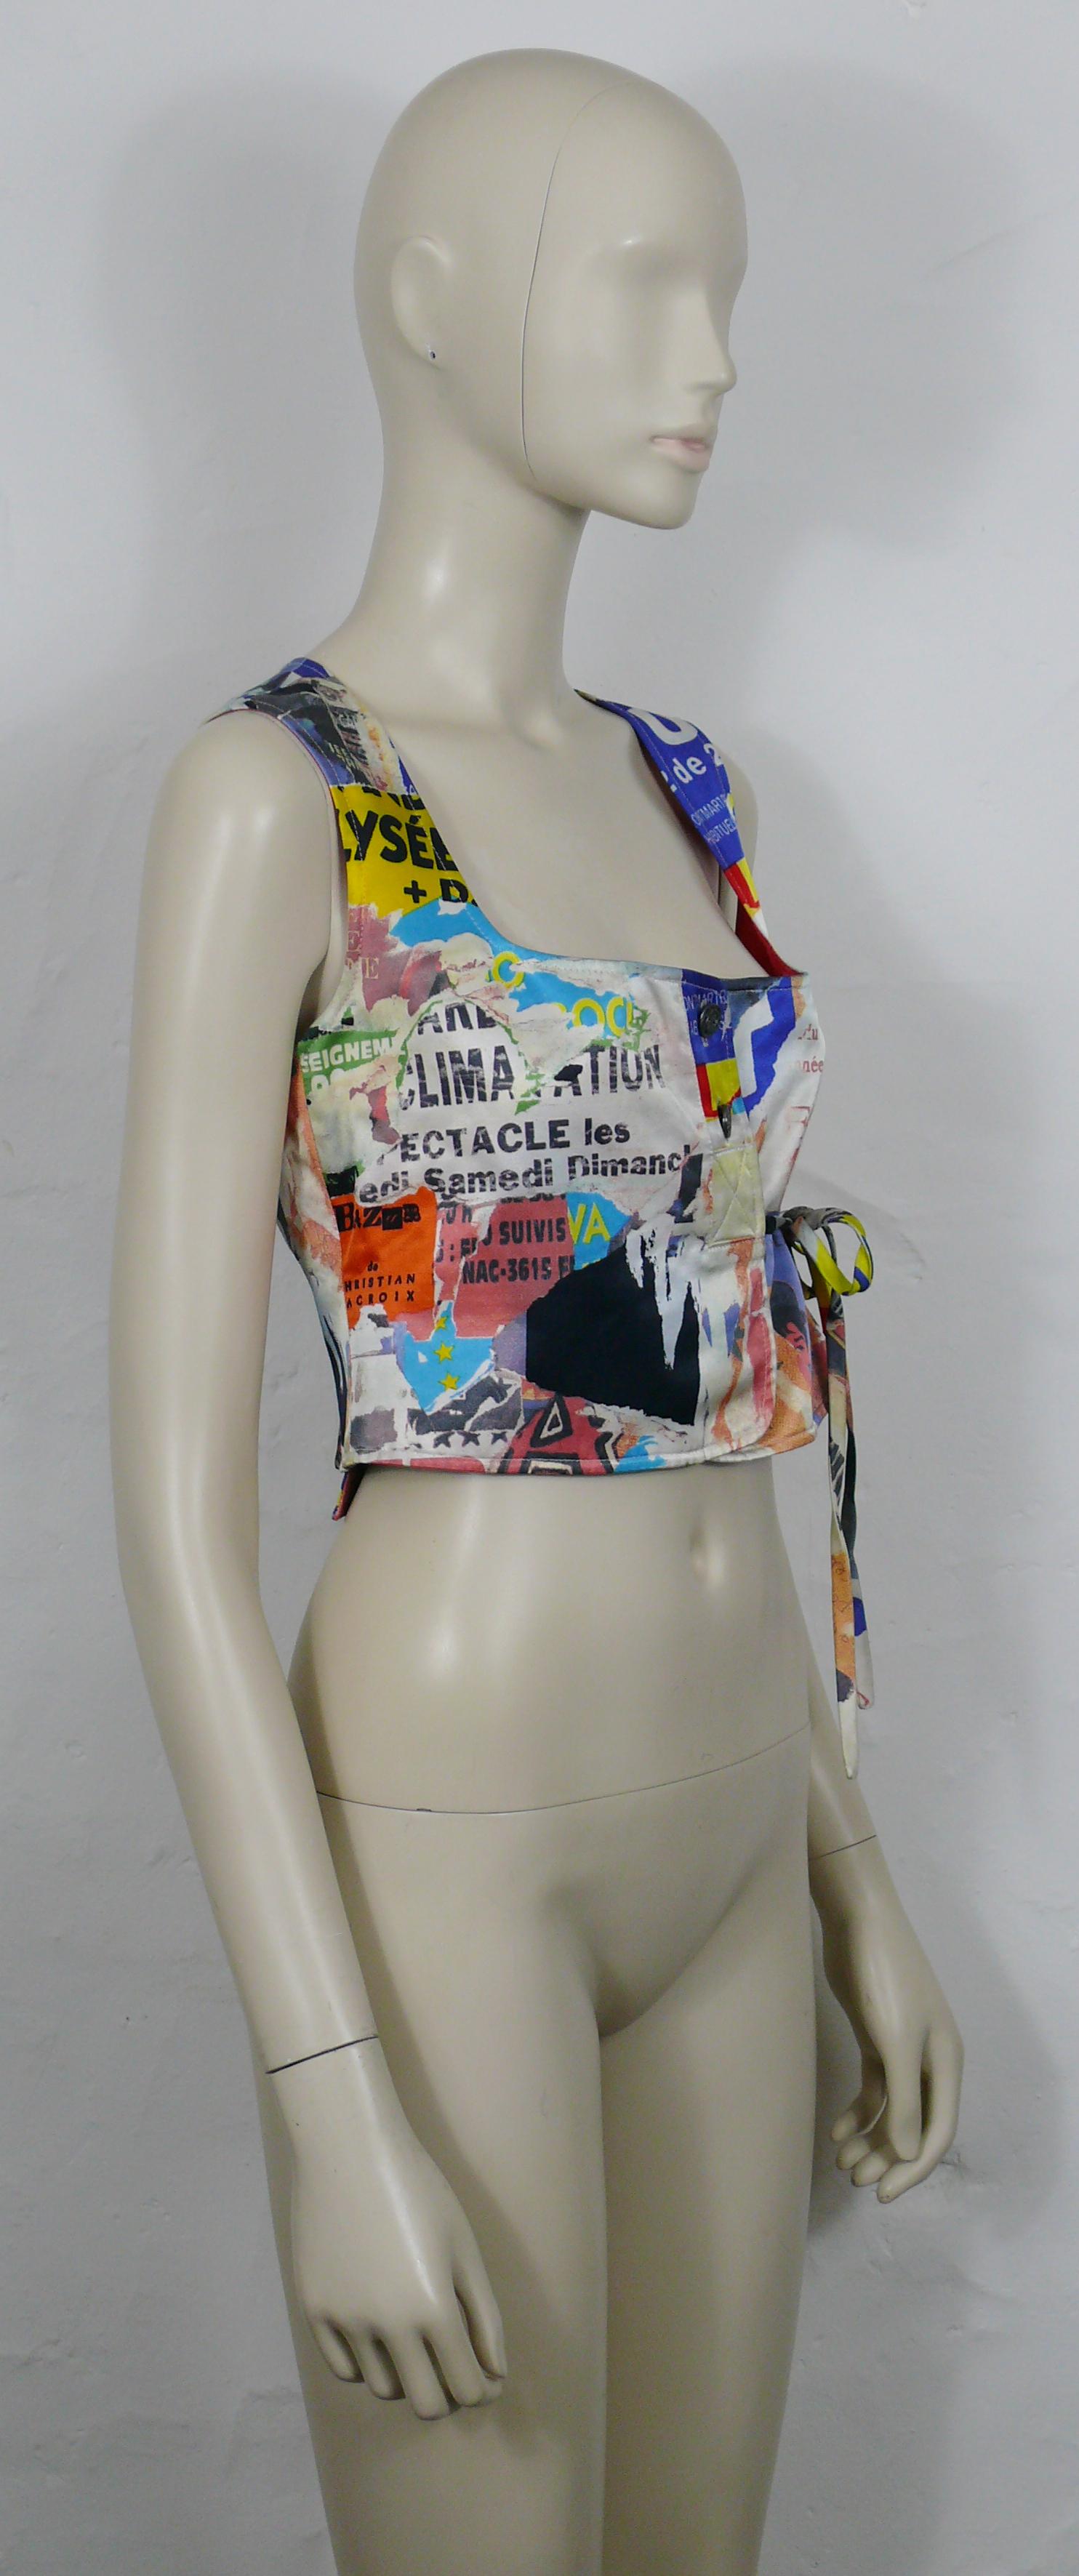 CHRISTIAN LACROIX vintage colourful Pop Art vest featuring a stunning lacerated retro poster print all over in vibrant colors.

Front buttoning (2 buttons).
Side strap fastening.

Label reads BAZAR de CHRISTIAN LACROIX.

Size label reads :